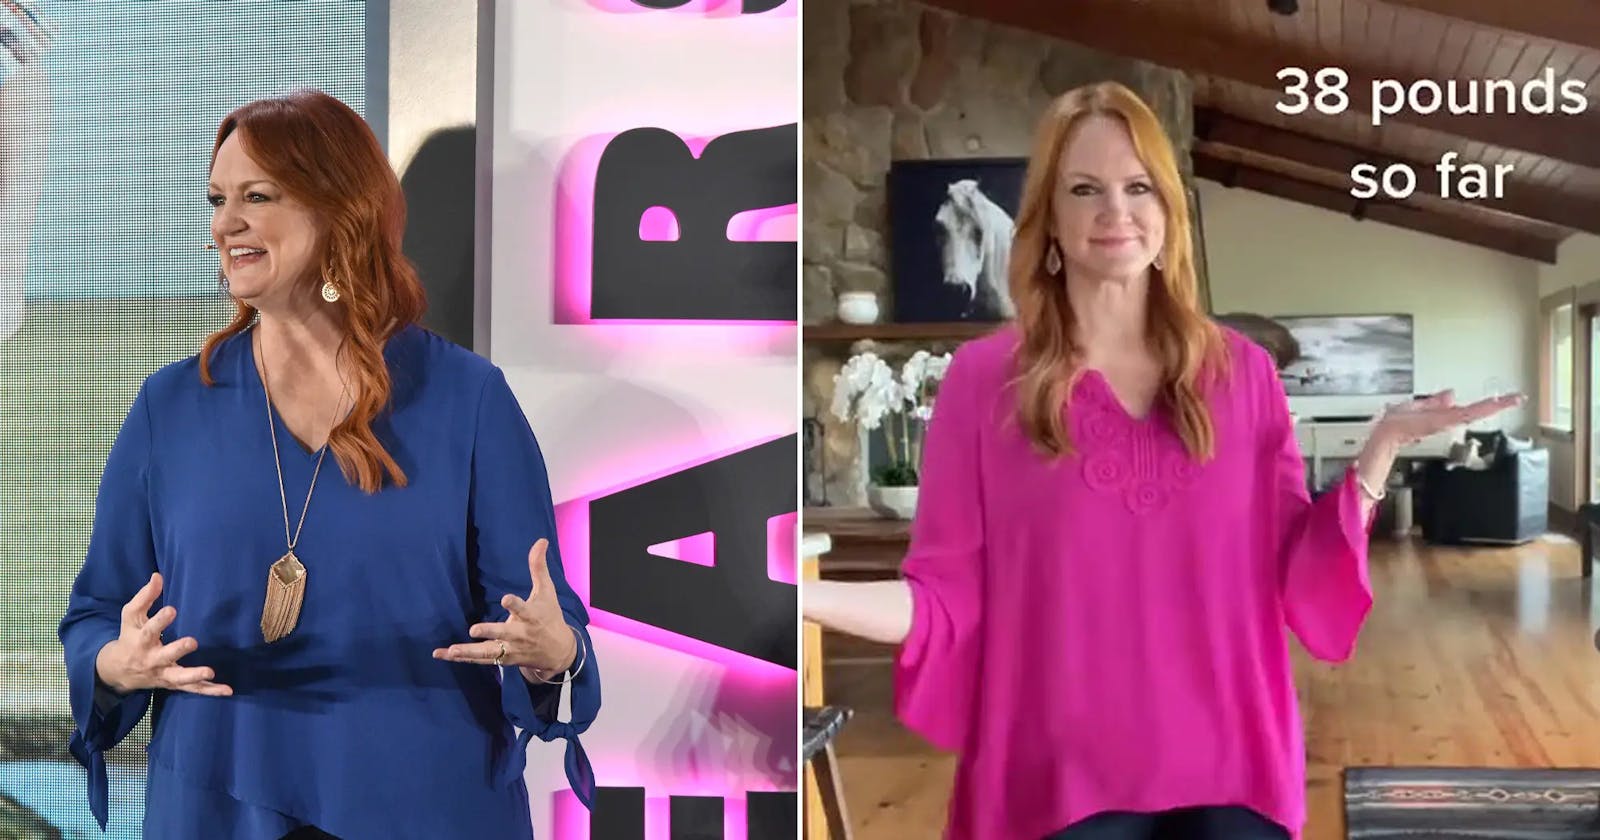 Stay Up To Date On The Latest Ree Drummond News